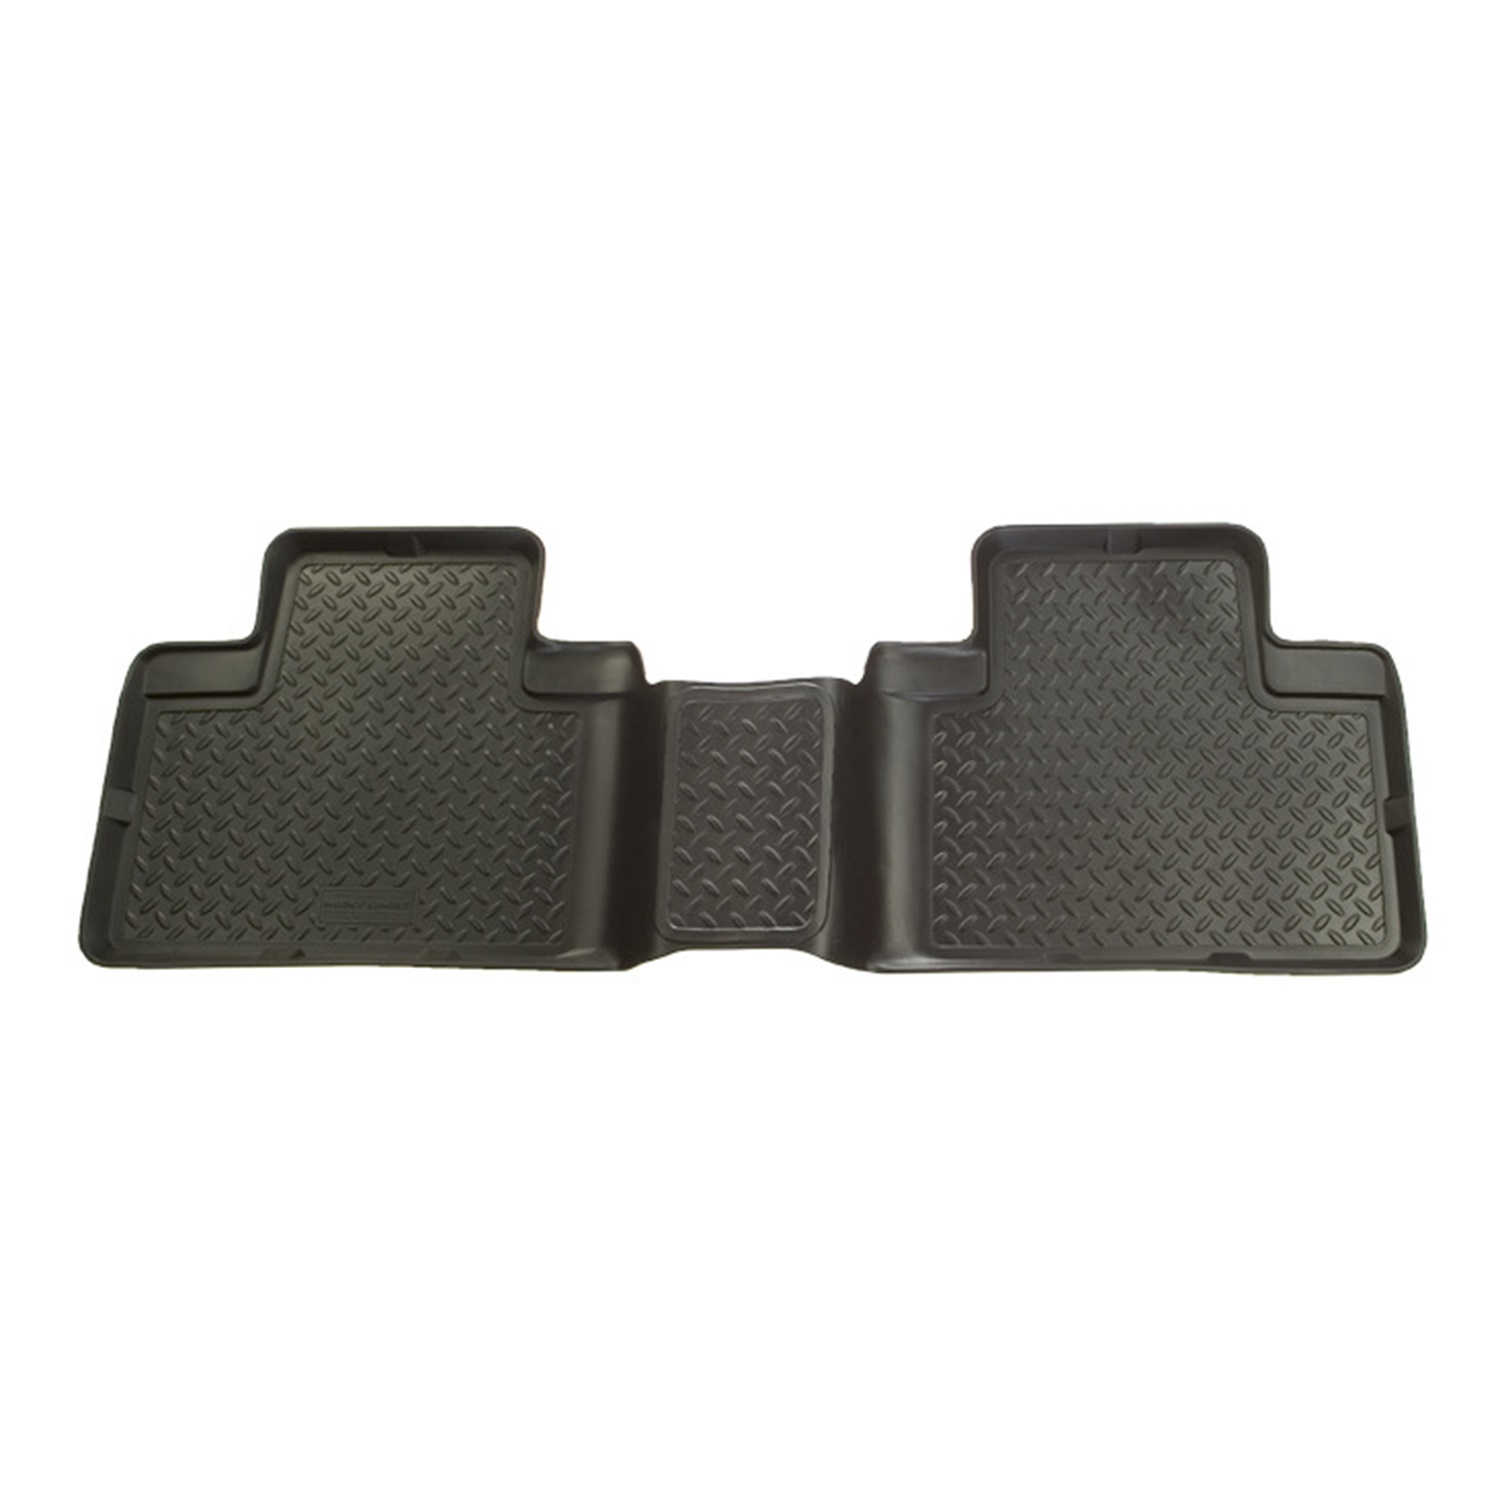 Husky Liners Husky Liners 65481 Classic Style; Floor Liner 05-08 Tacoma